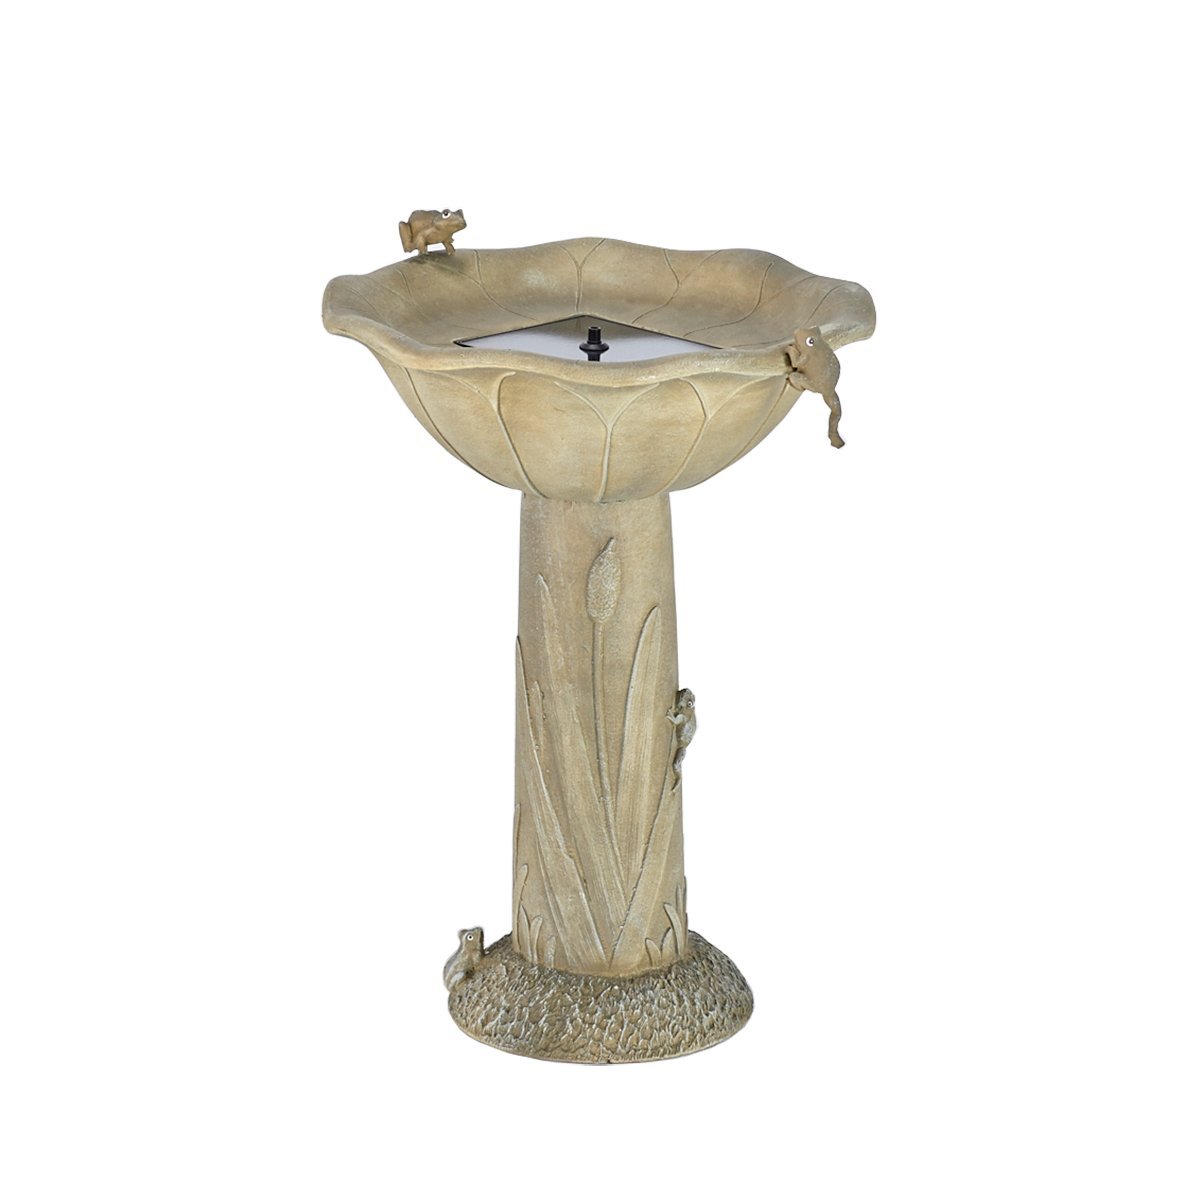 Smart Solar 20633R01 Acadia Solar Birdbath, Olive Green Finish With Relief Of Cat Tails And Frogs Playfully Climbing The Pedestal, Requires No Wiring or Operating Costs